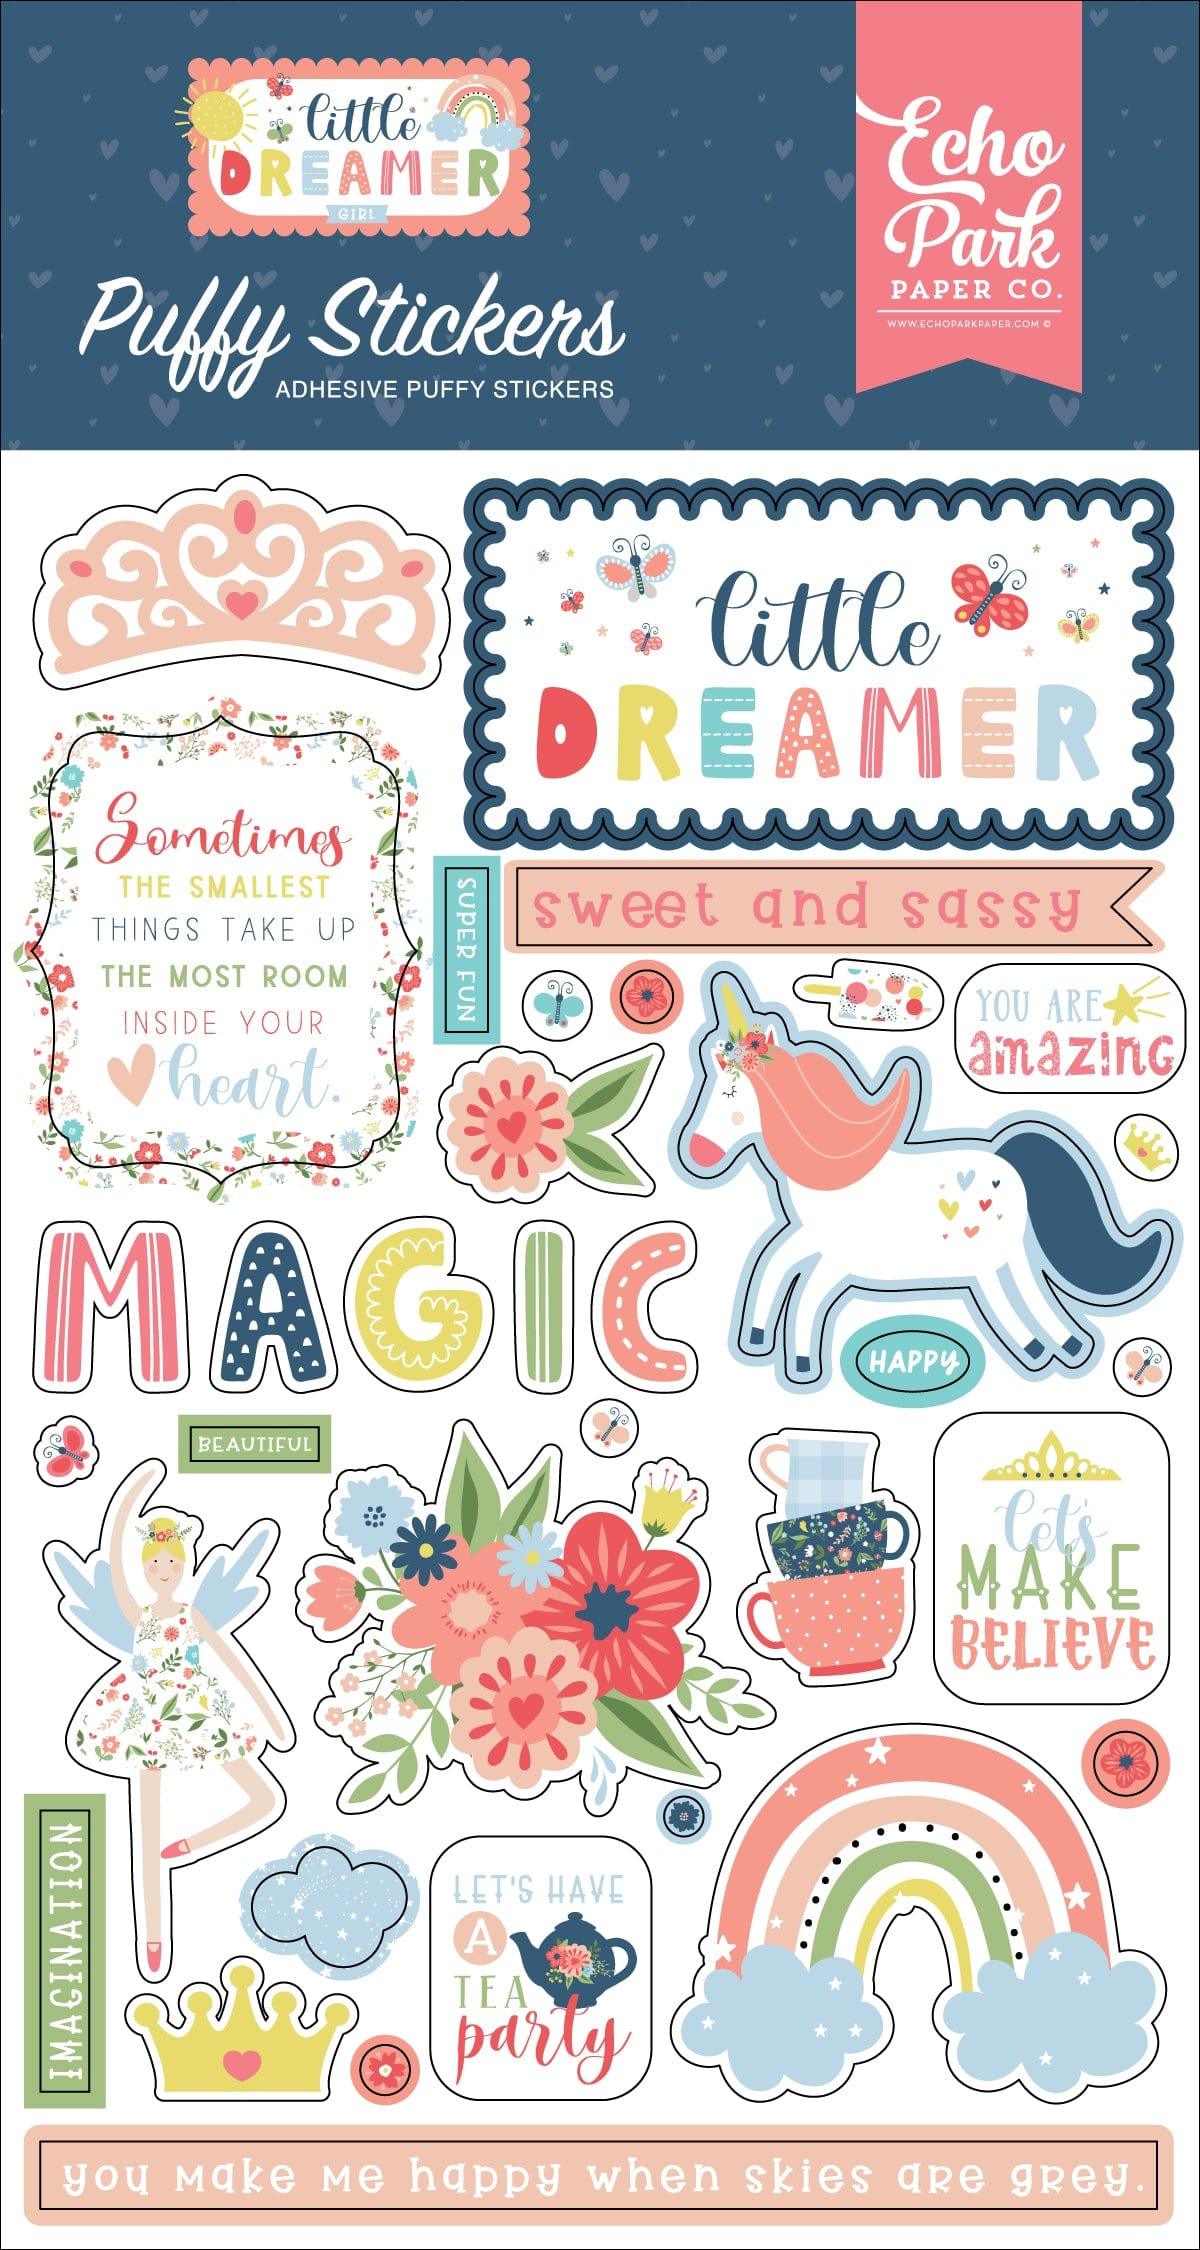 Little Dreamer Girl Collection 4 x 7 Puffy Stickers Scrapbook Embellishments by Echo Park Paper - Scrapbook Supply Companies